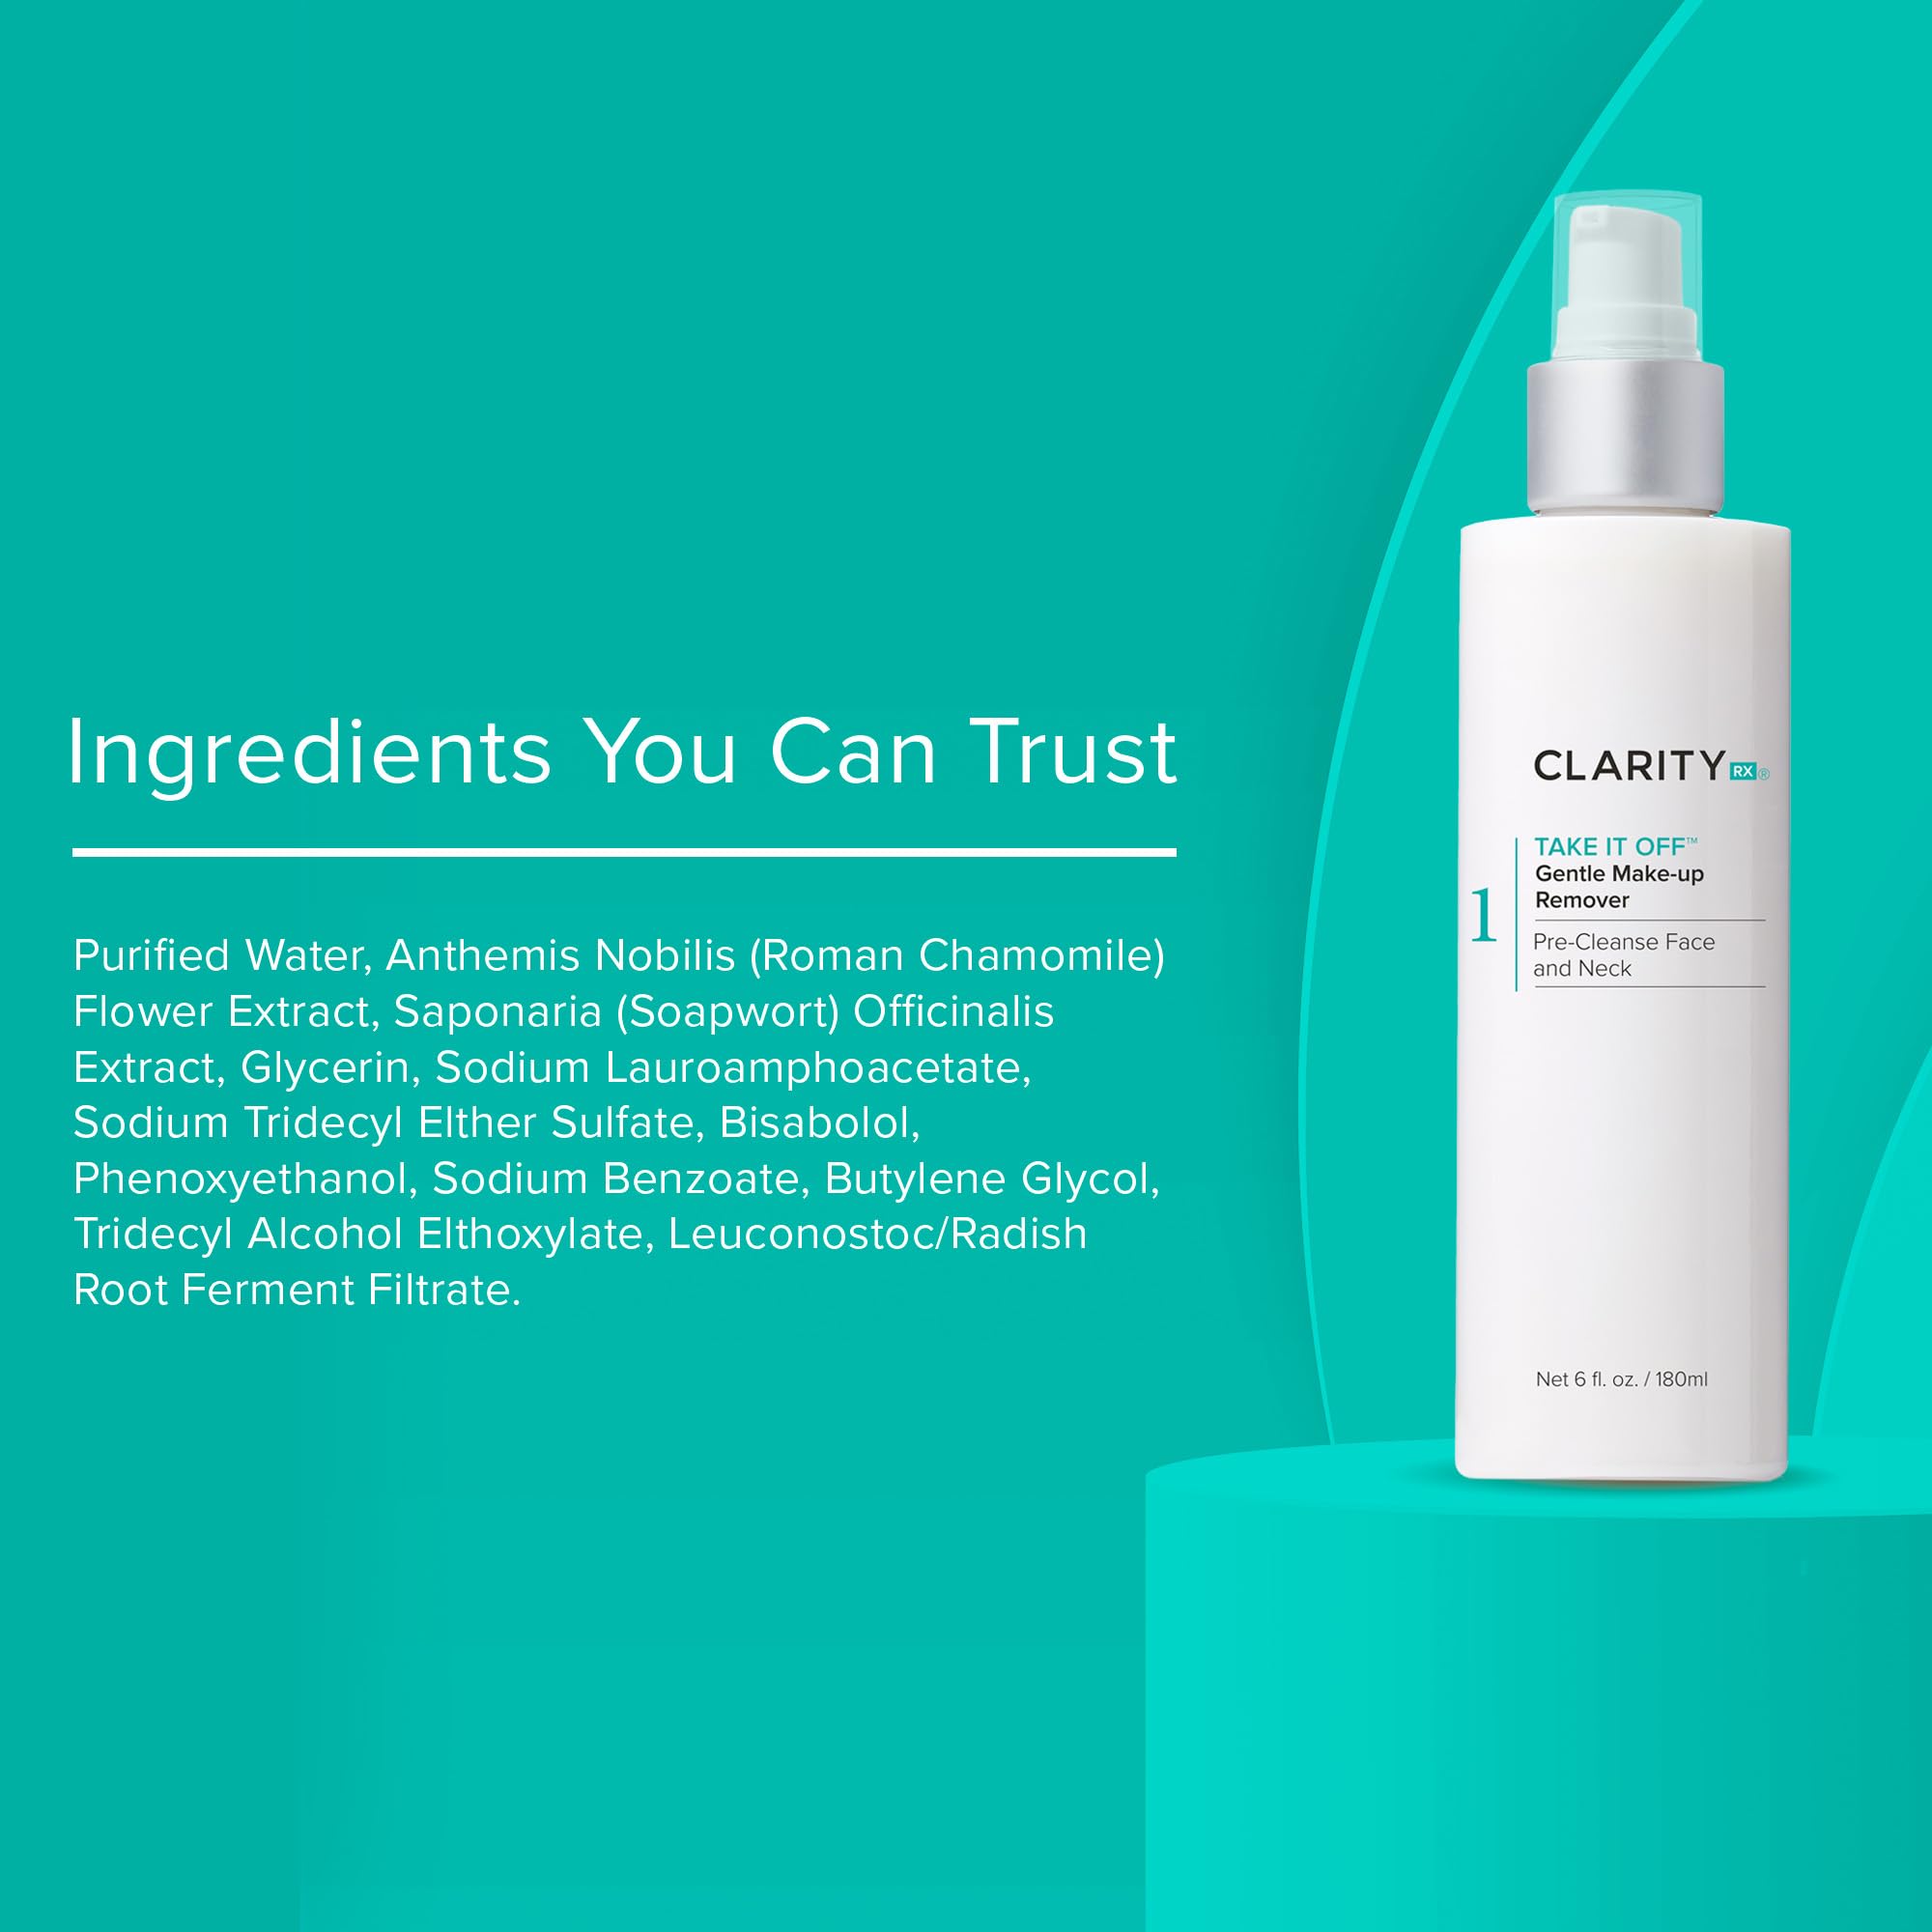 ClarityRx Take It Off Gentle Face & Eye Makeup Remover, Natural Plant-Based Calming Facial Cleanser with Antioxidants for All Skin Types